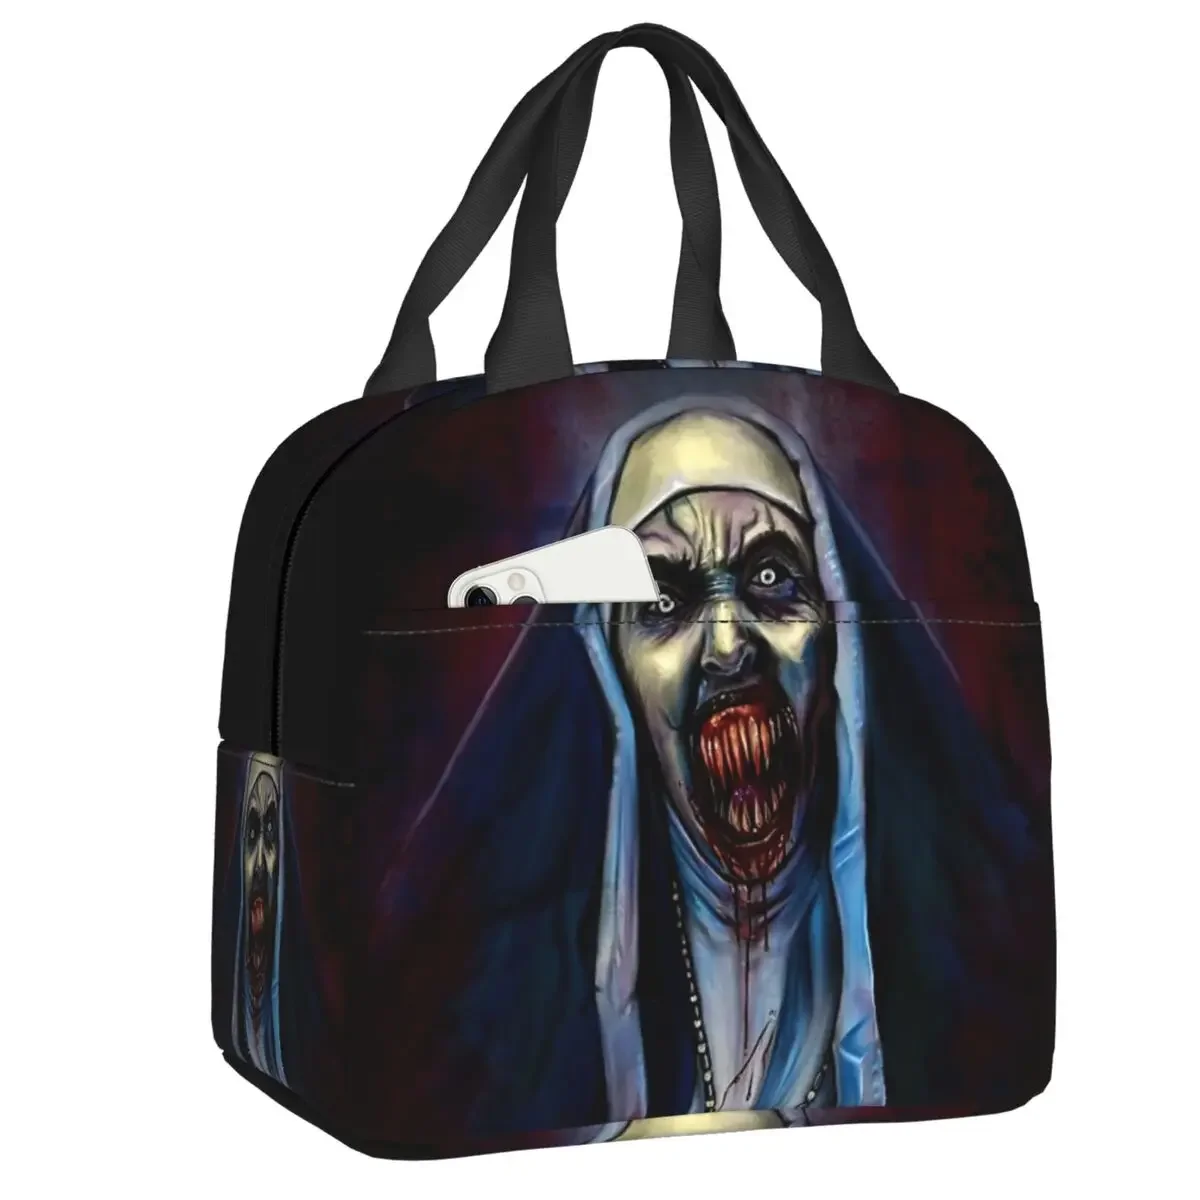 

The Nun Valak Lunch Box for Women Halloween Horror Movie Thermal Cooler Food Insulated Lunch Bag School Children Portable Tote